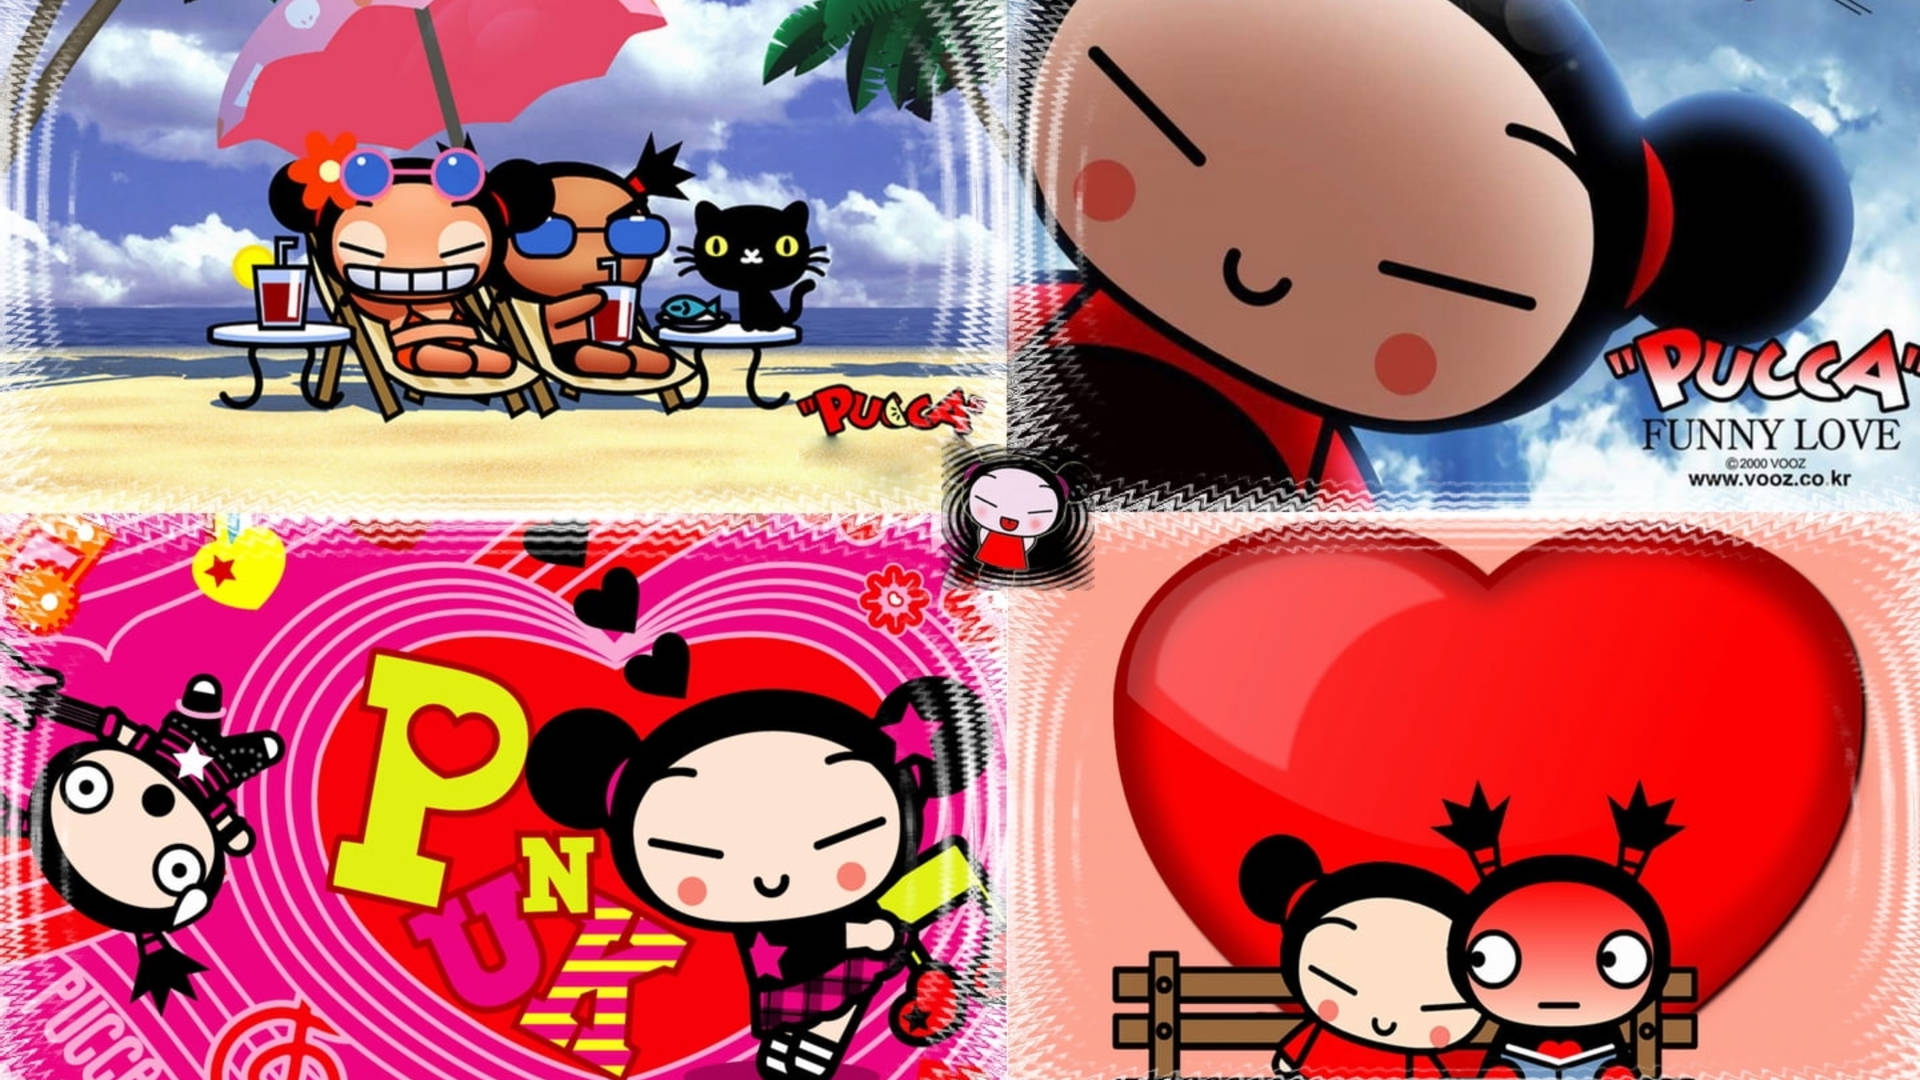 Free Pucca Wallpaper Downloads, [100+] Pucca Wallpapers for FREE |  